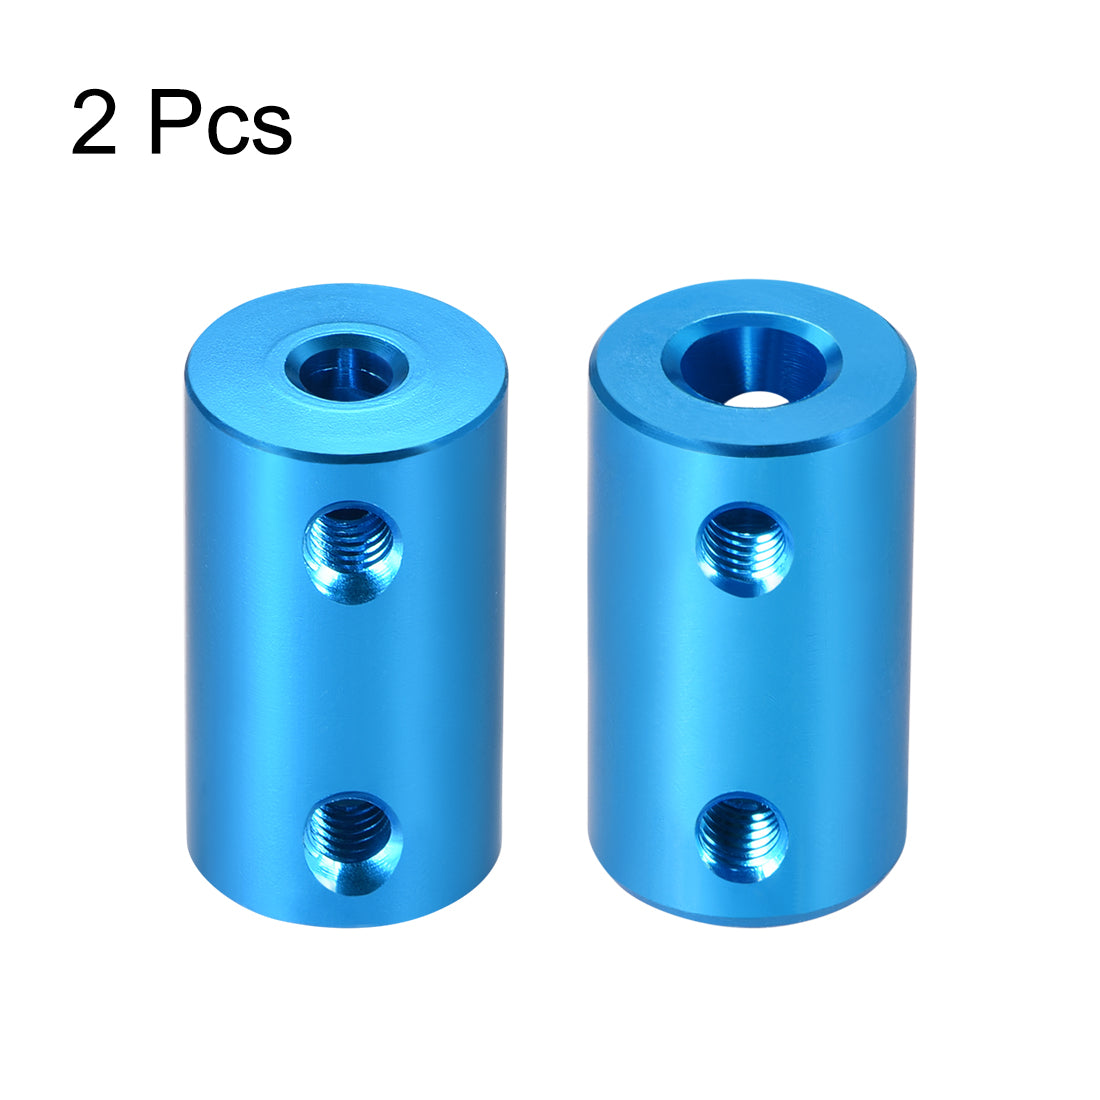 uxcell Uxcell Shaft Coupling 4mm to 6mm Bore L25xD14 Robot Motor Wheel Rigid Coupler Connector Blue 2pcs